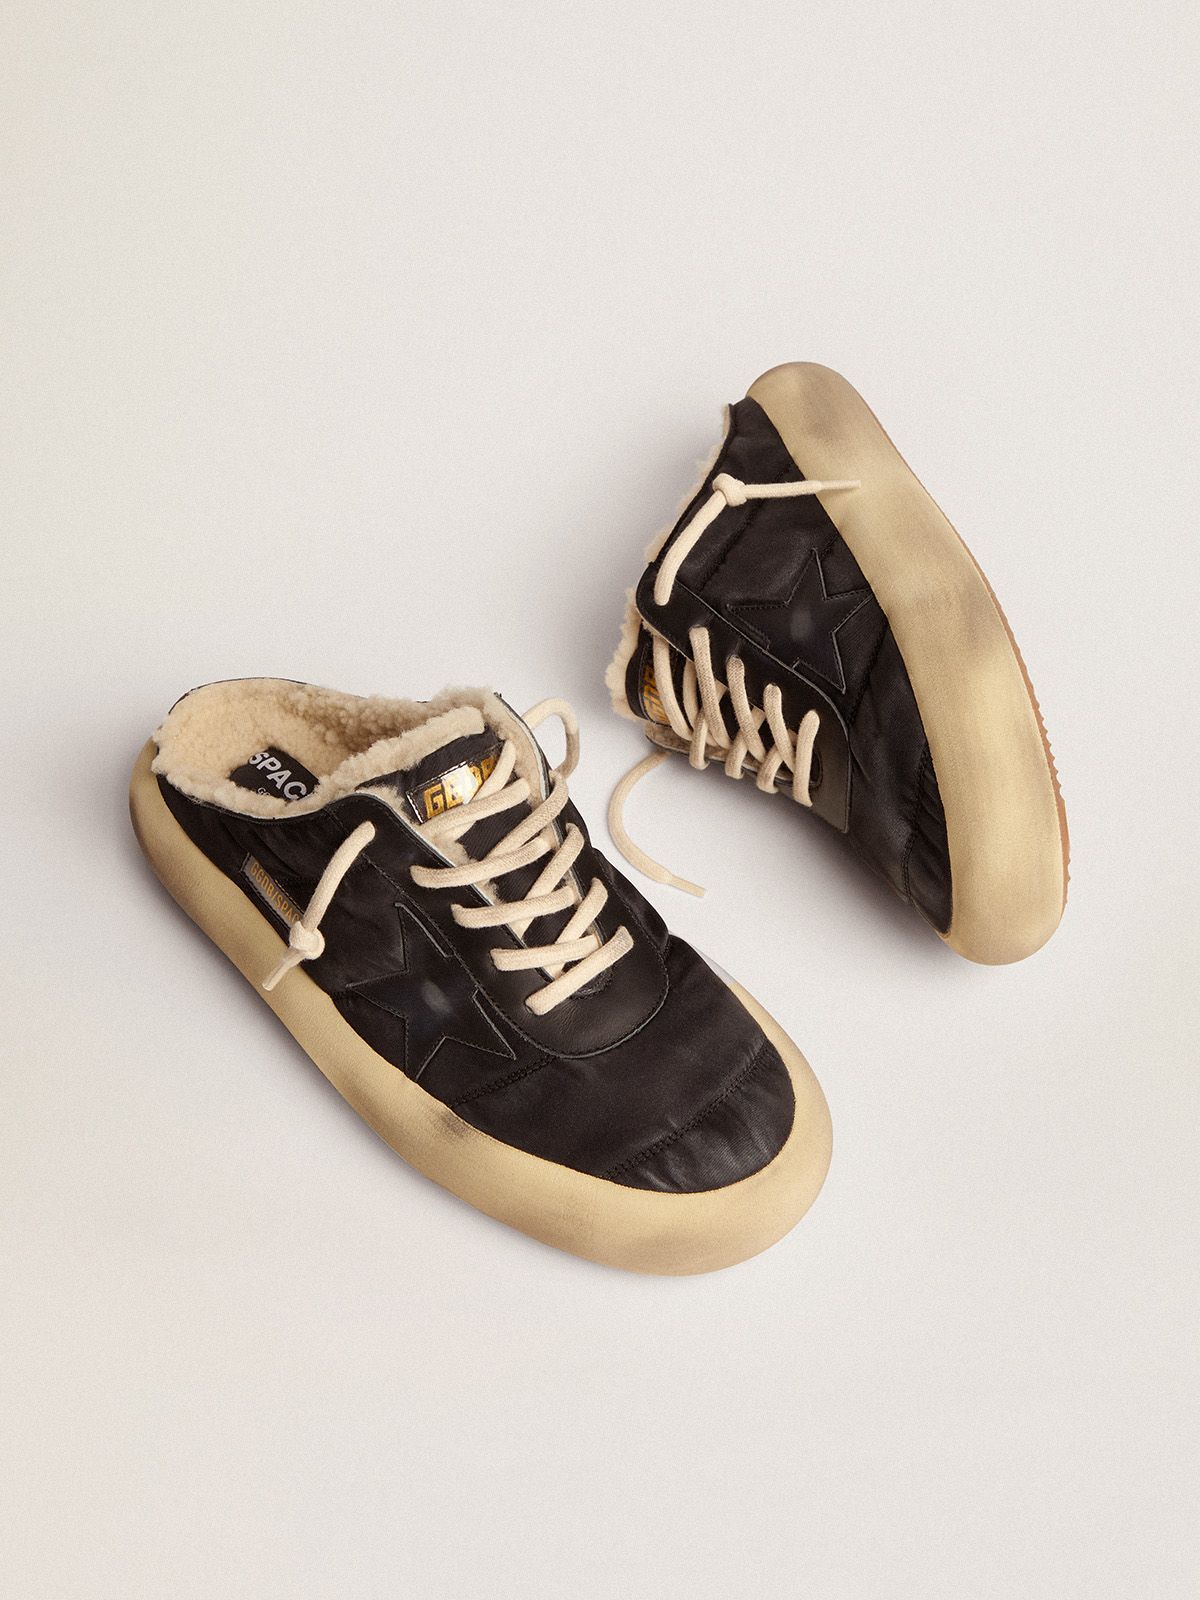 Space-Star Sabot Shoes in Quilted Black Nylon with Shearling Lining